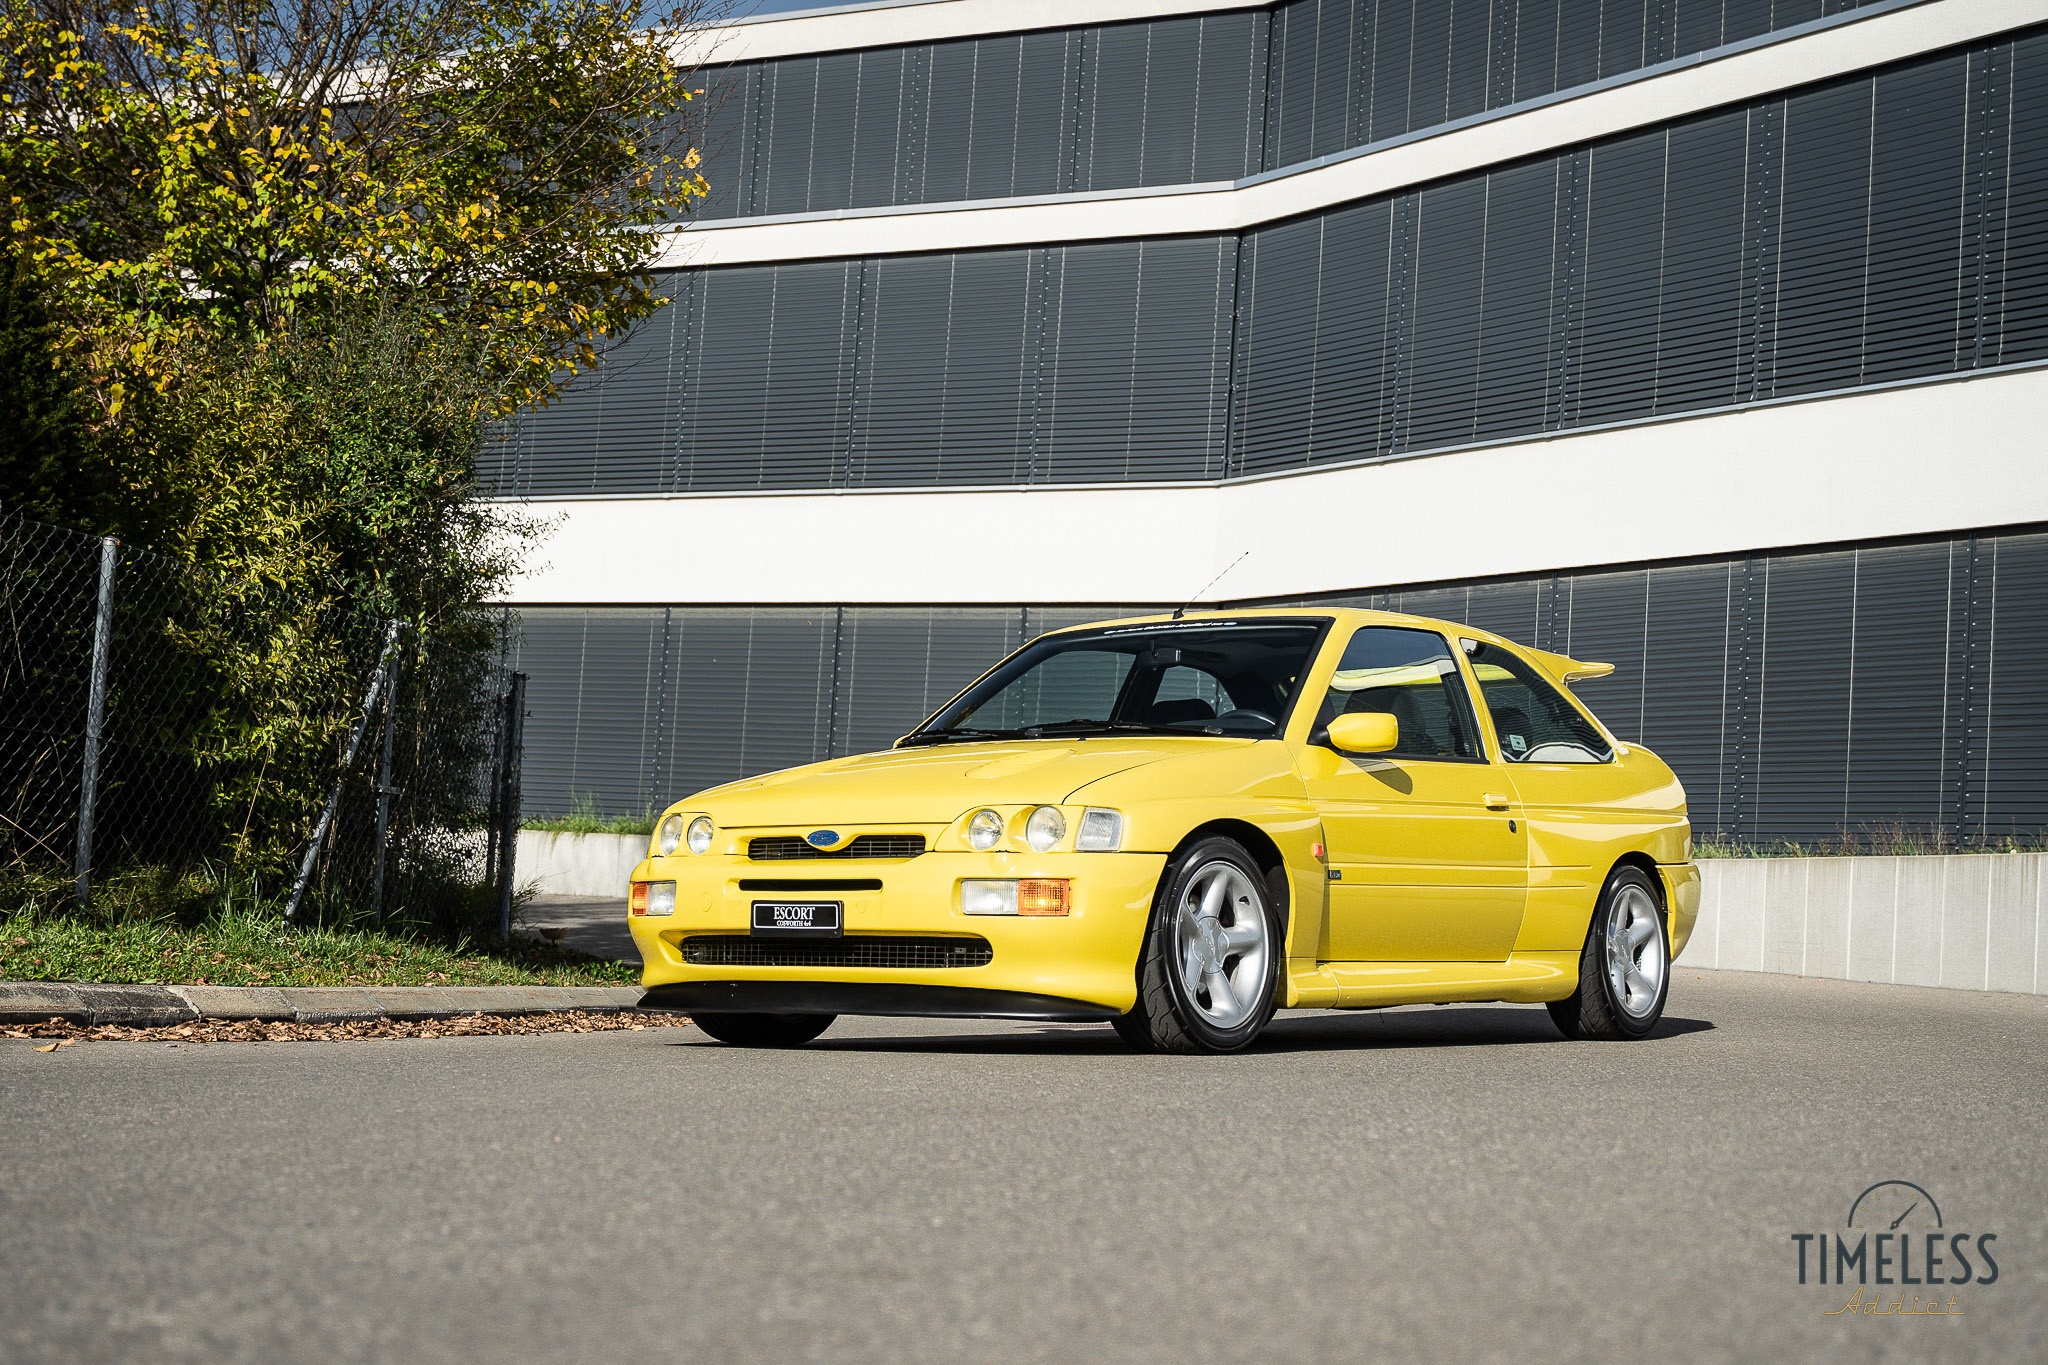 Ford Escort RS Cosworth - Timeless Addict